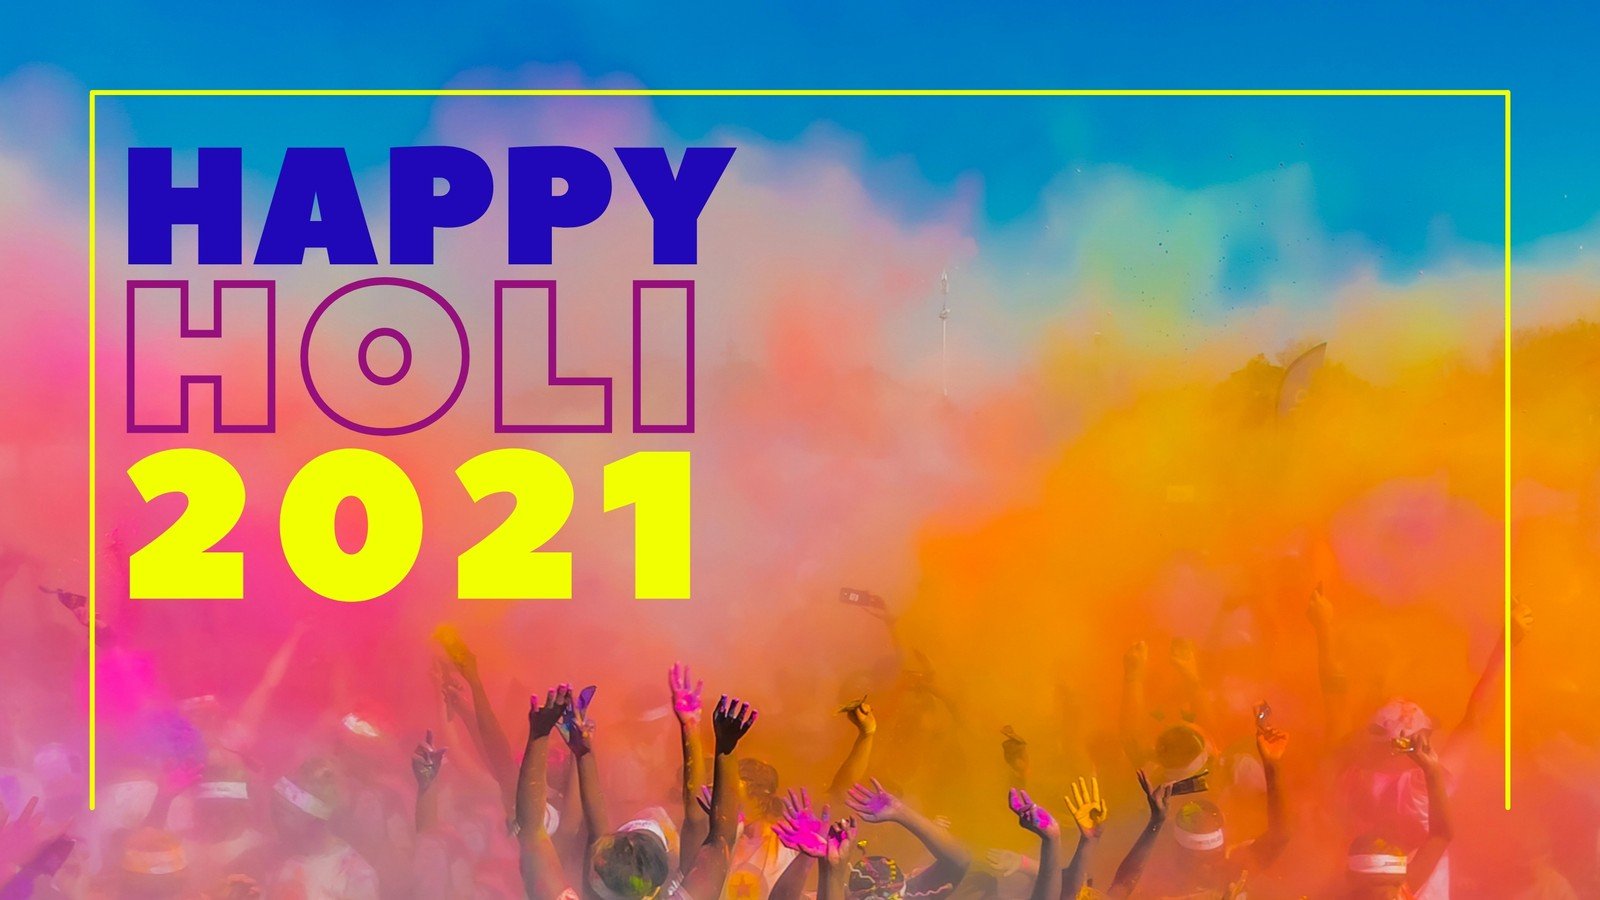 Page 8 - Free and customizable happy holi templates